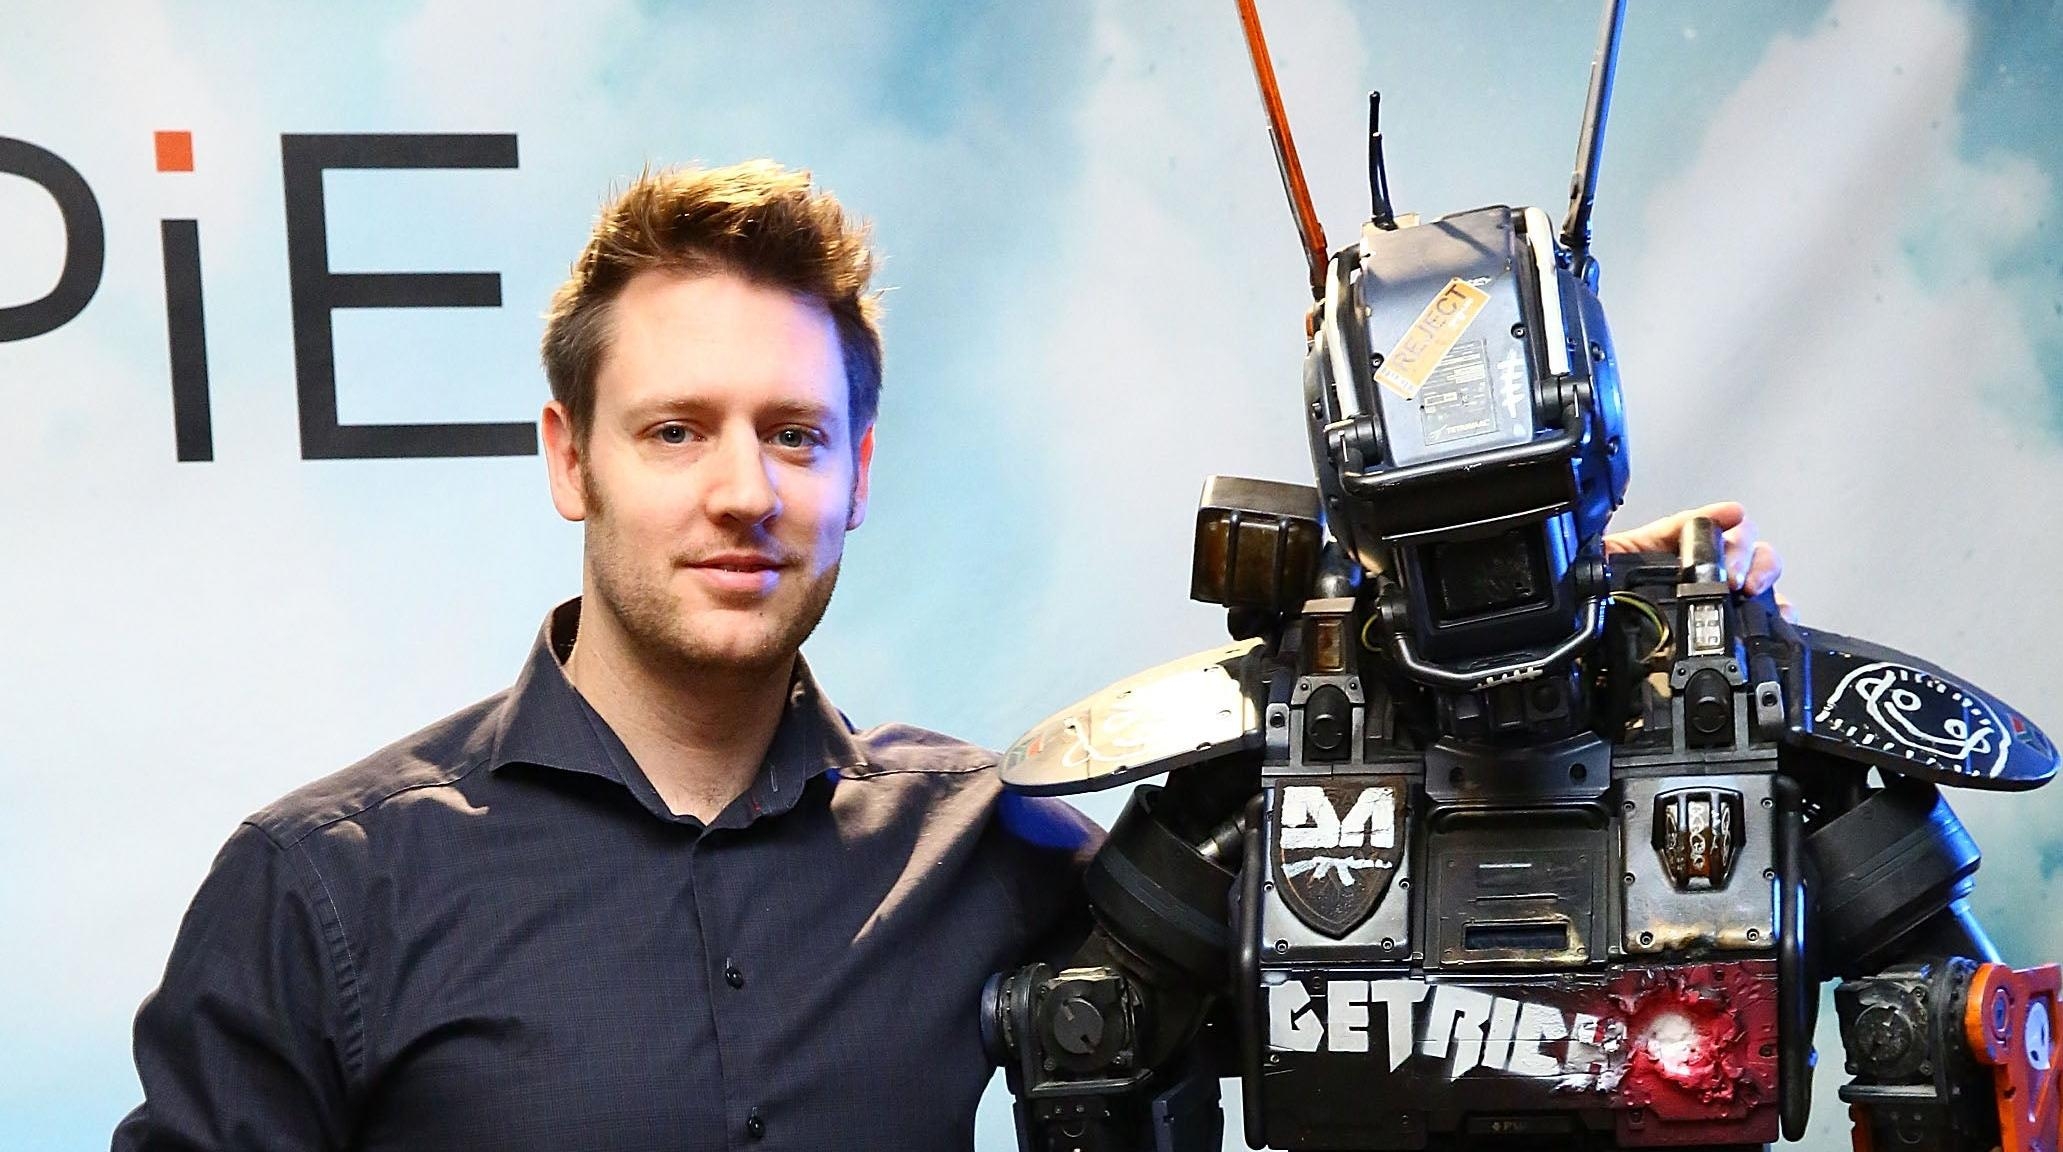 Neill Blomkamp is making video games now